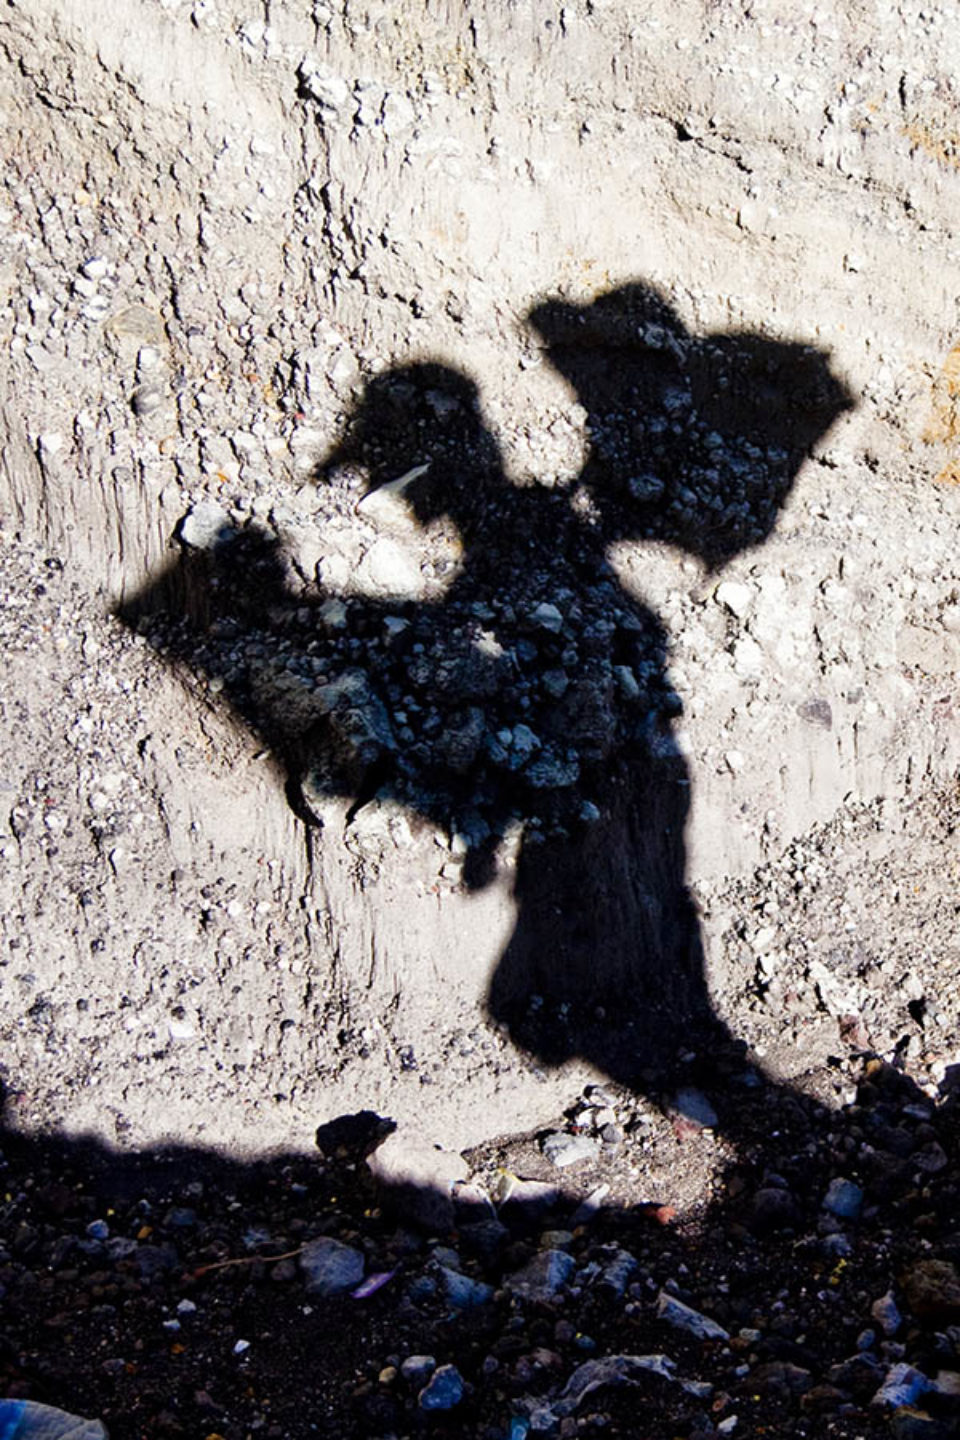 Shadow of sulphur miner carrying load